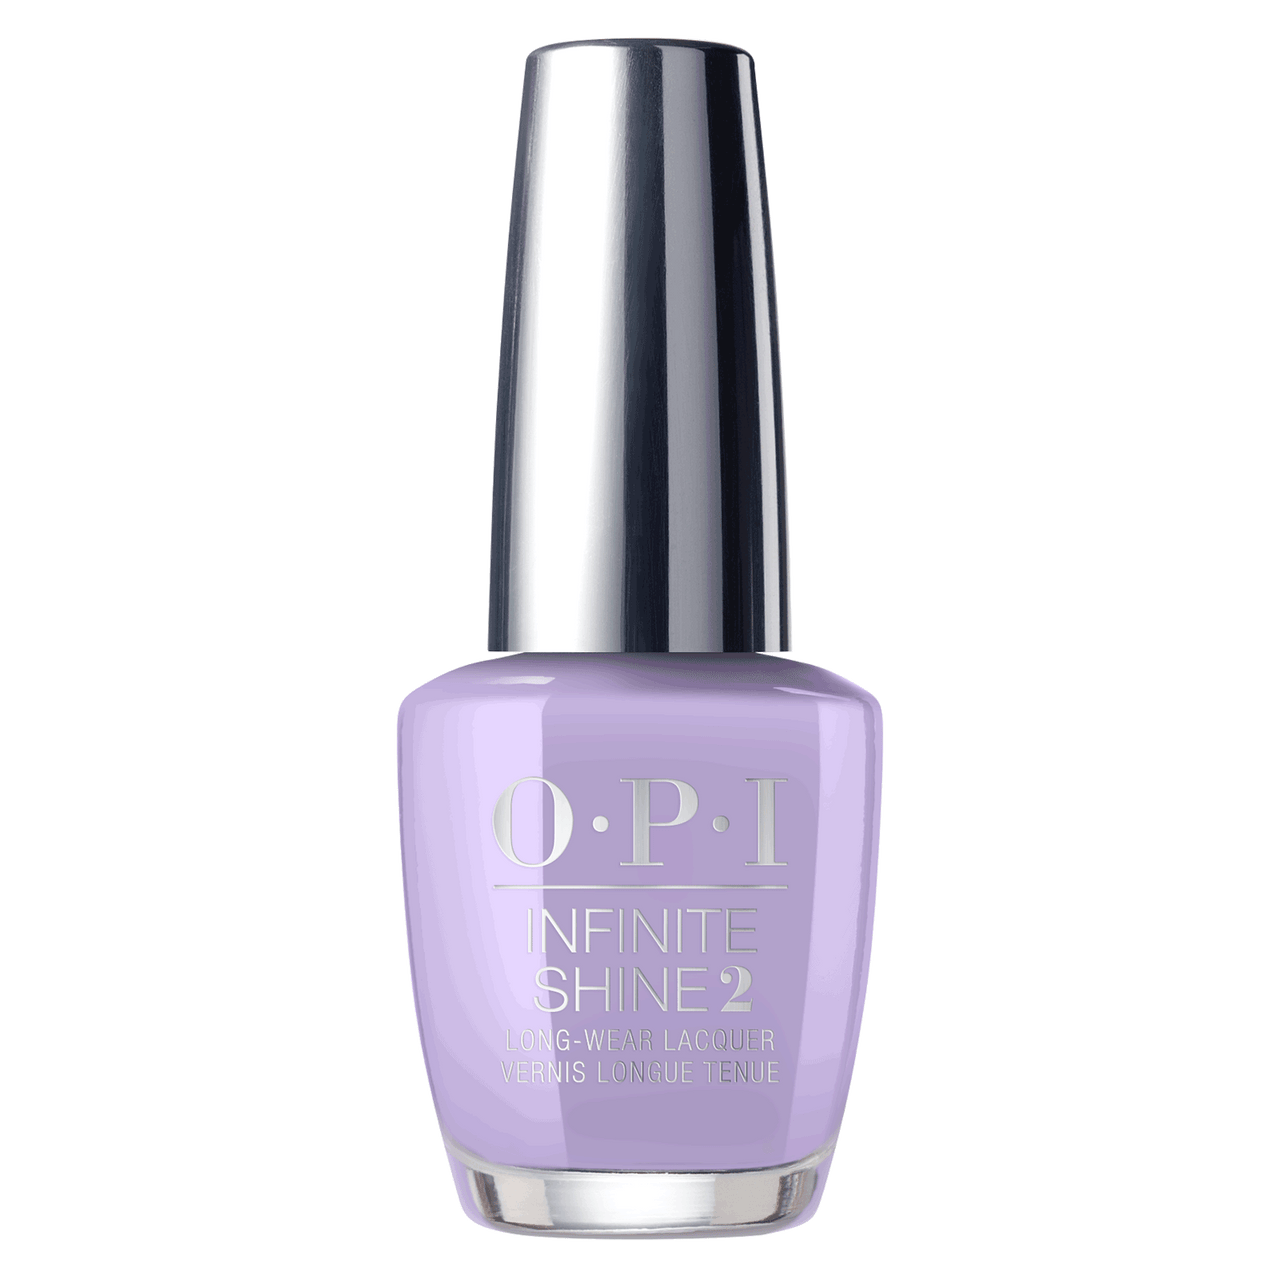 OPI Polly Want A Lacquer?